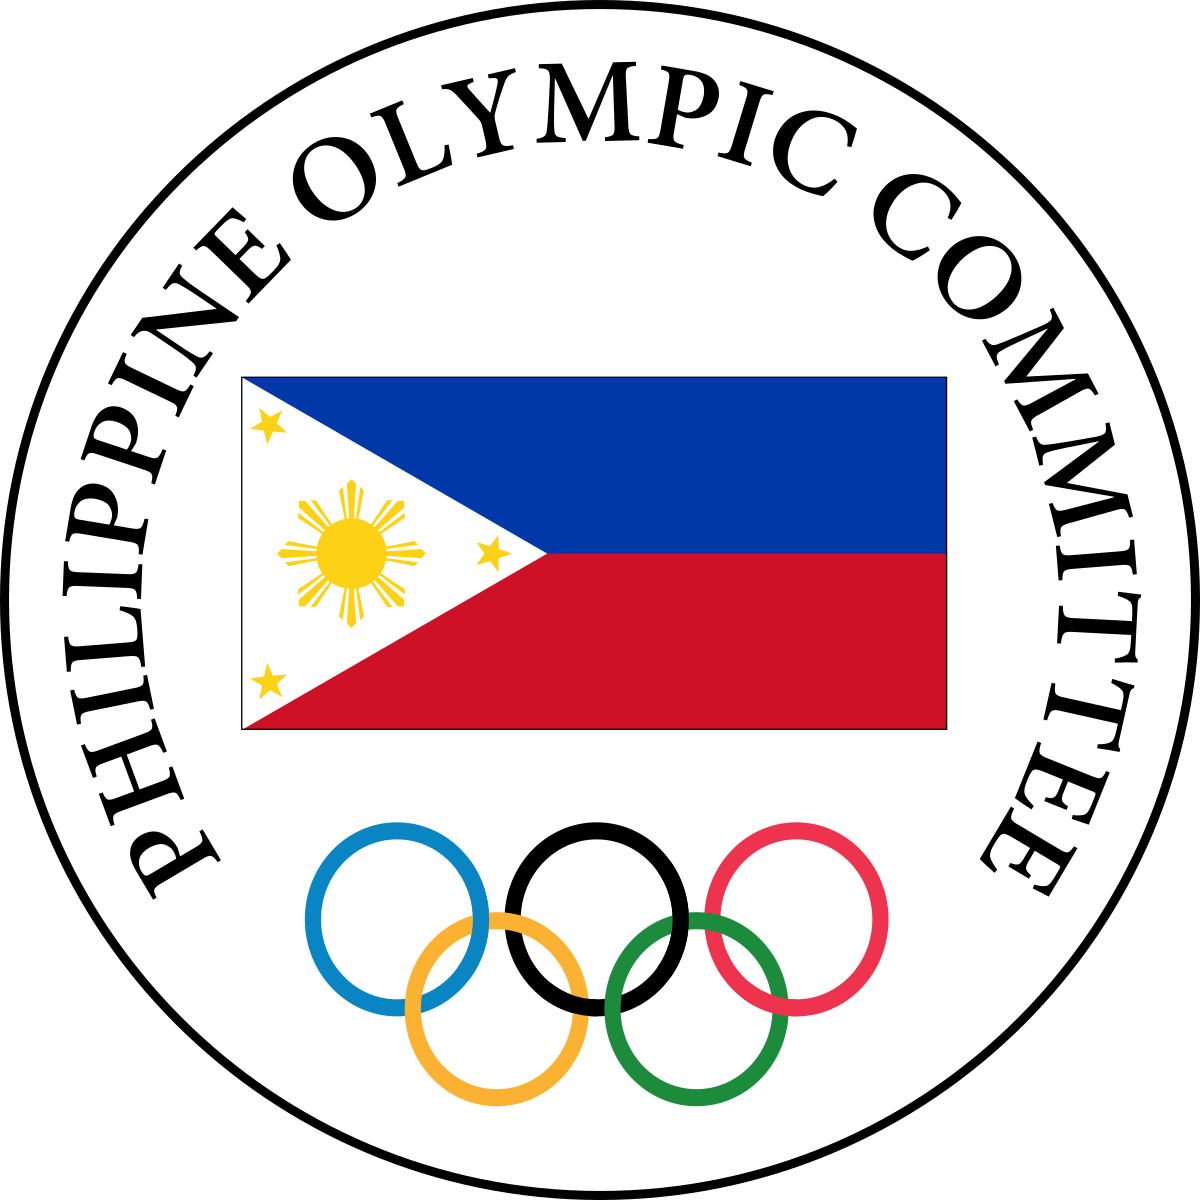 Juico and Tolentino to contest election for Philippine Olympic Committee President